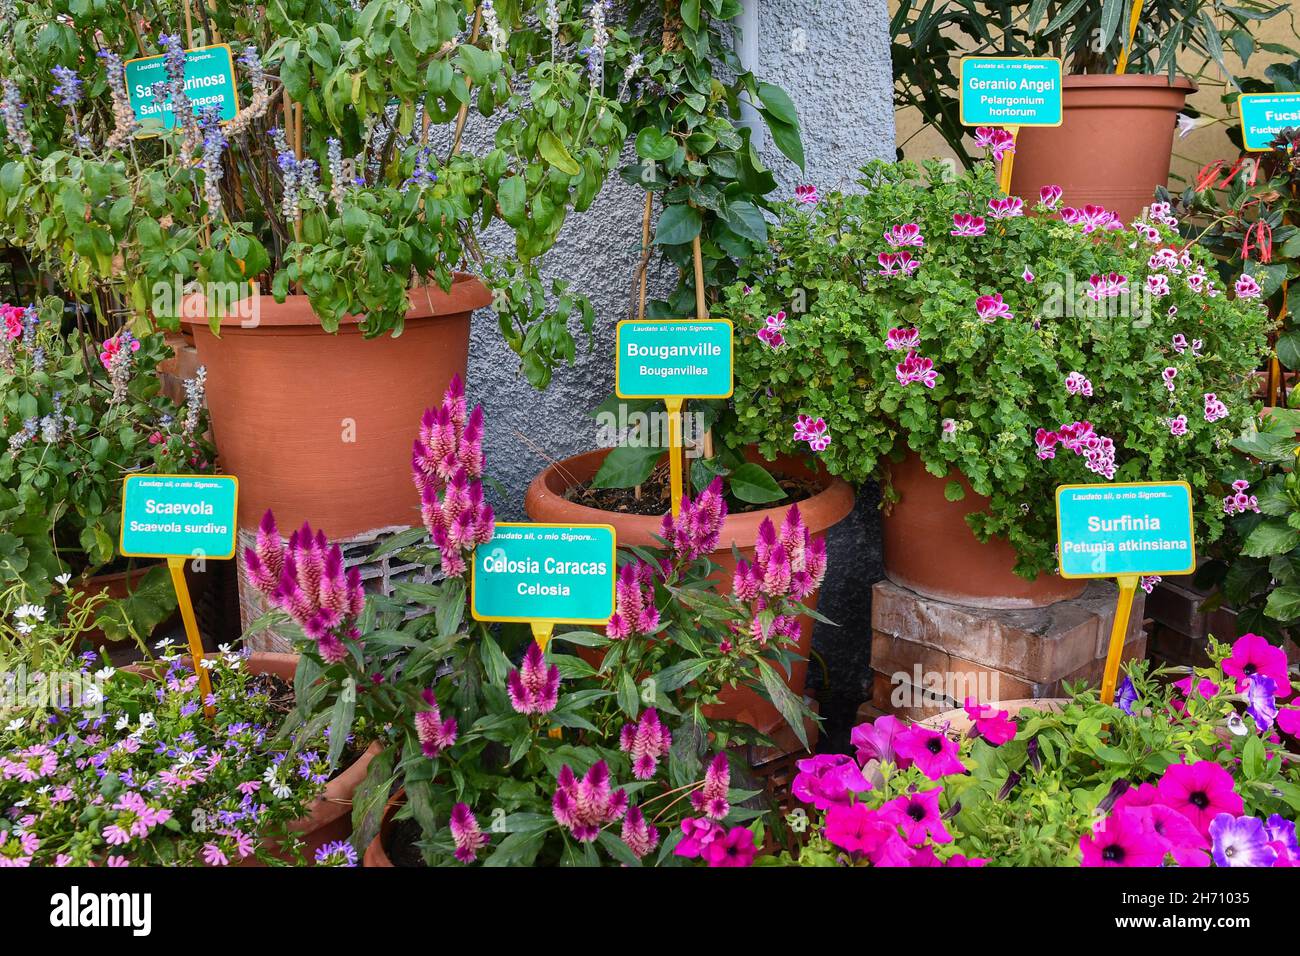 Detail of a botanical garden with flowering potted plants and tags indicating their names and varieties, Alassio, Savona, Liguria, Italy Stock Photo